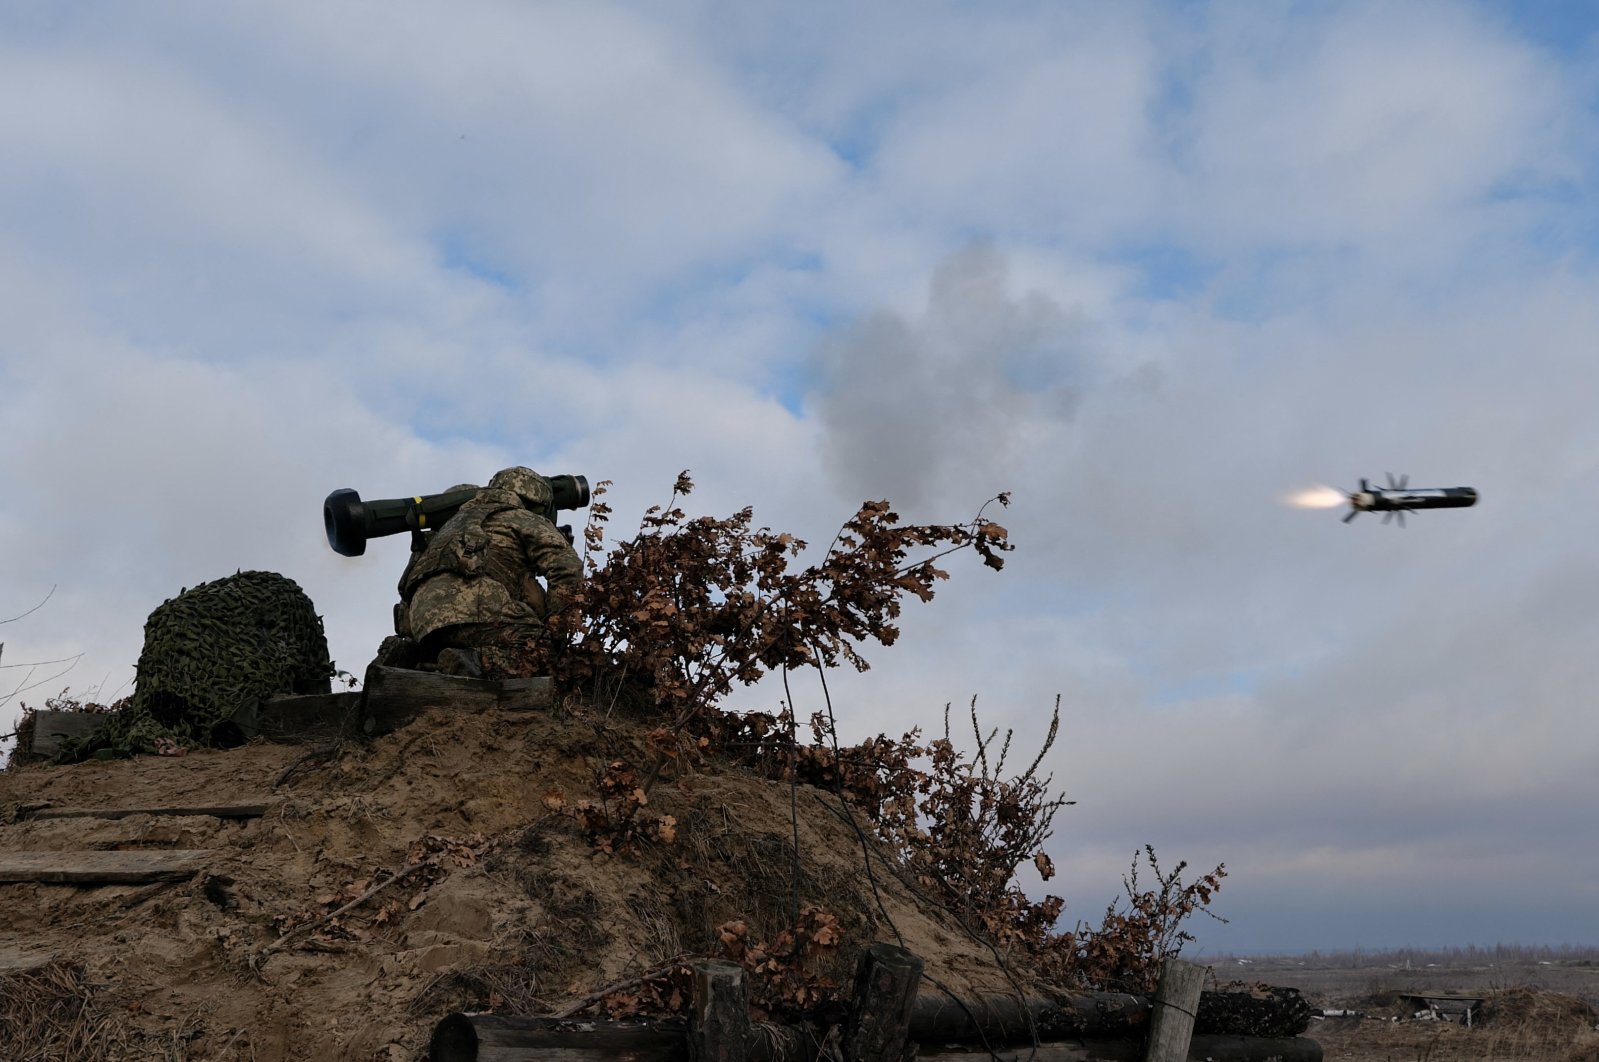 Service members of the Ukrainian Armed Forces fire a Javelin anti-tank missile during drills at a training ground in an unknown location in Ukraine, in this handout picture released Feb. 18, 2022. (Reuters Photo)